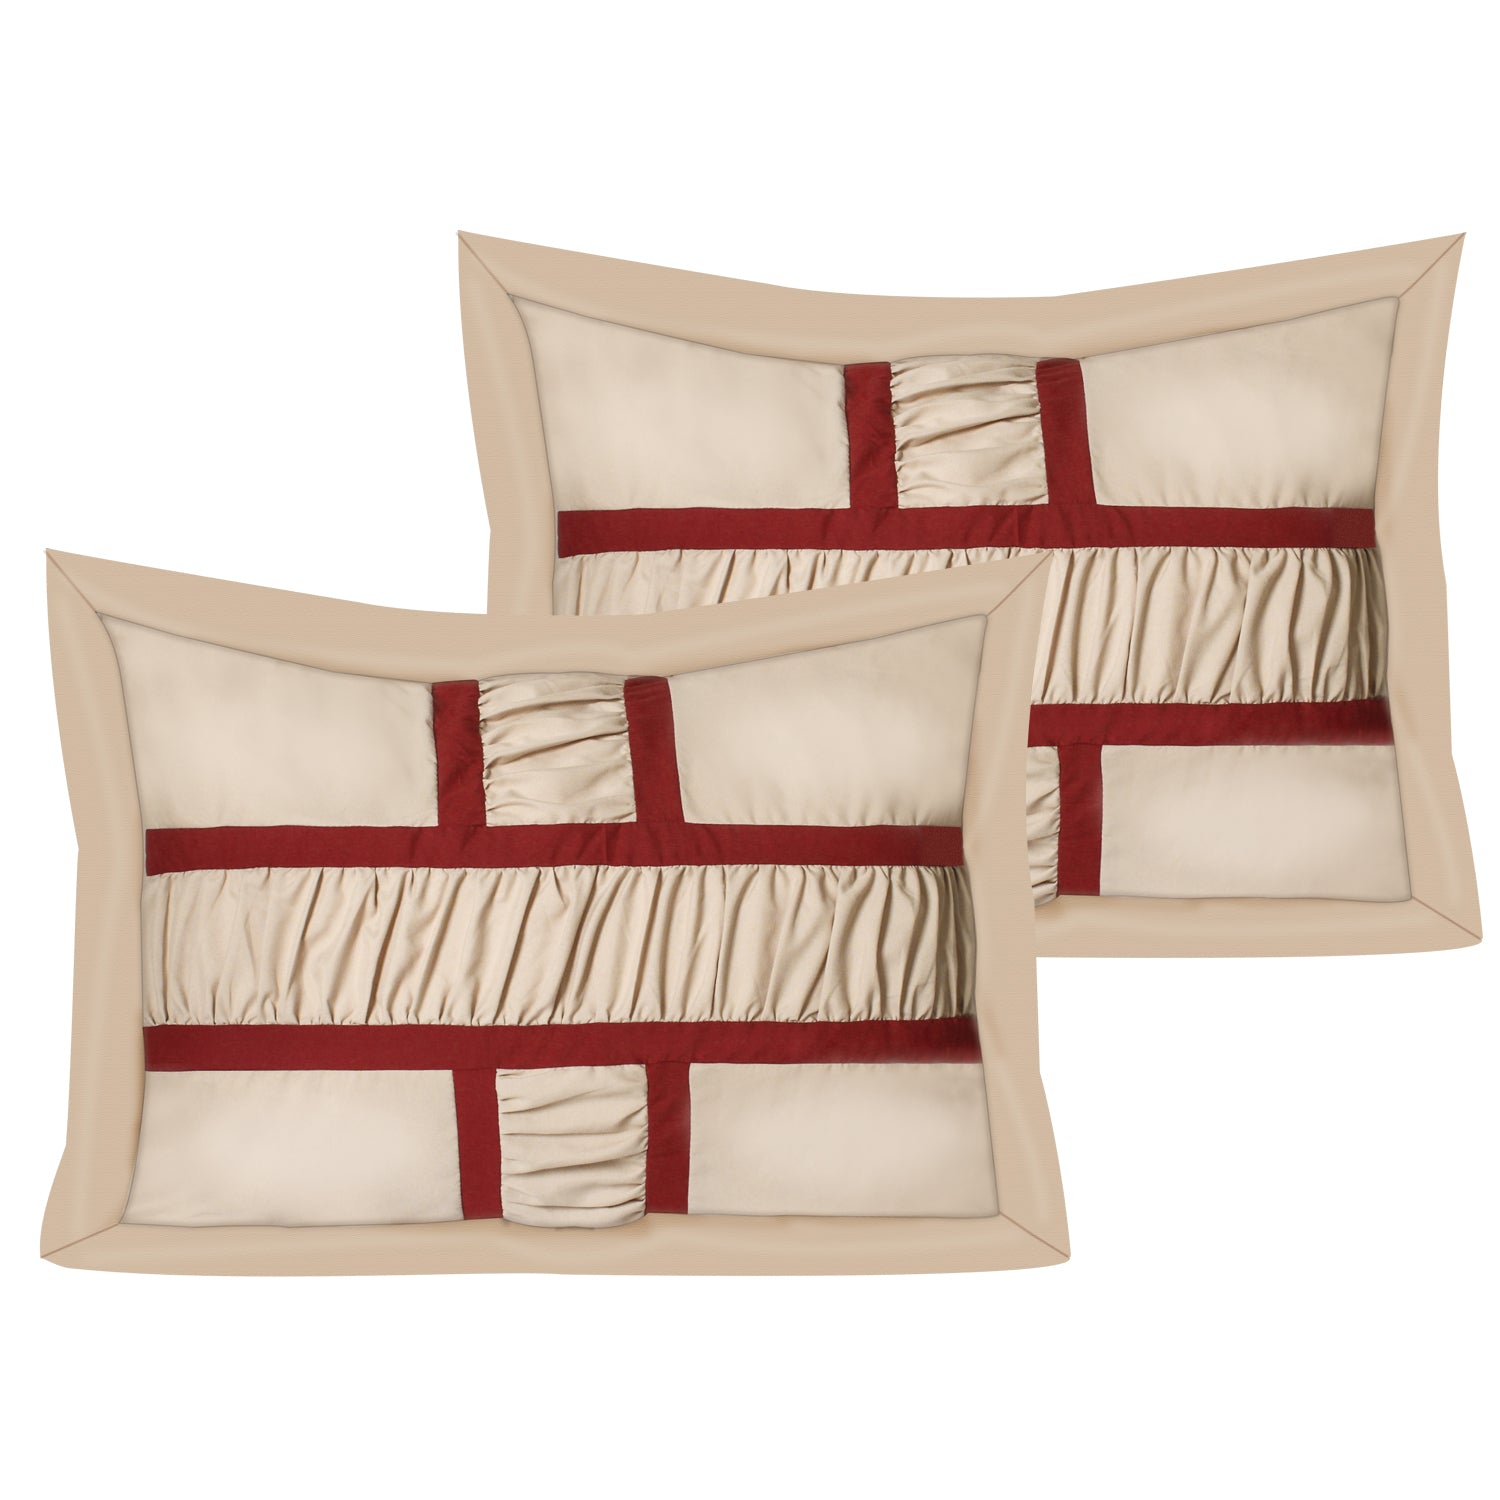 MARMA 7pc TAUPE Bedding Comforter Set. Ruffle & Patchwork, Microfiber Fabric, Fade Resistant, Super Soft, Bed in a Bag